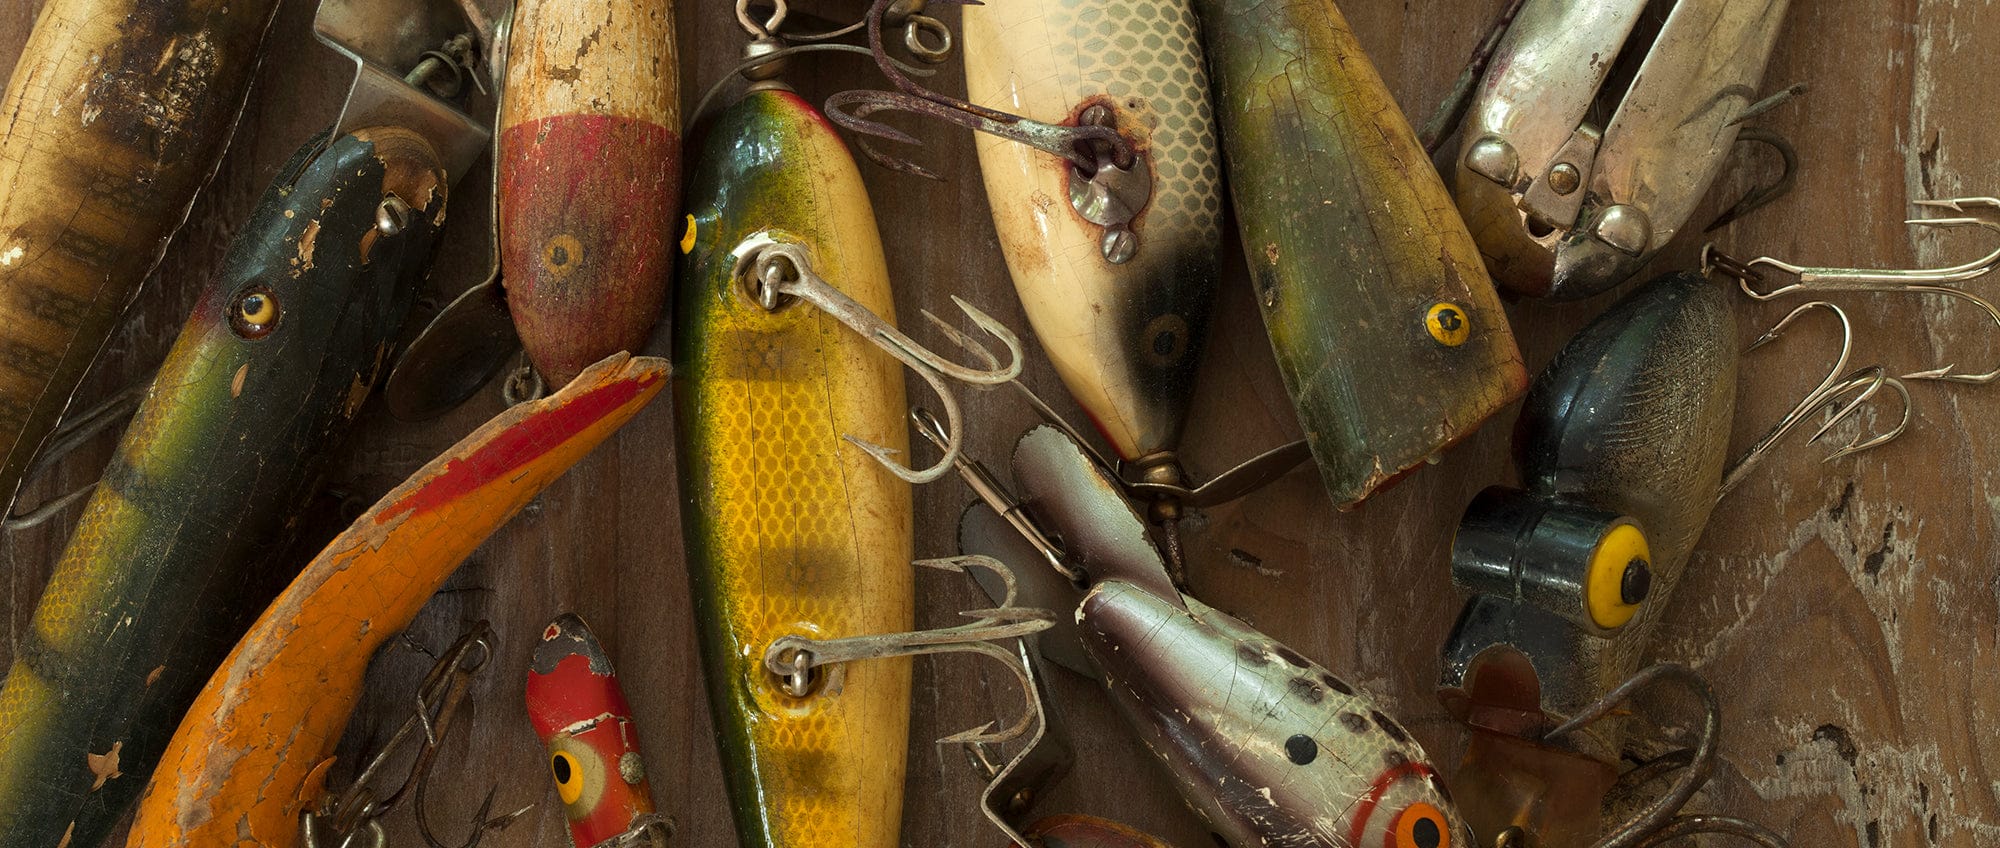 Fly Fishing Wooden Vintage Fishing Lures for sale